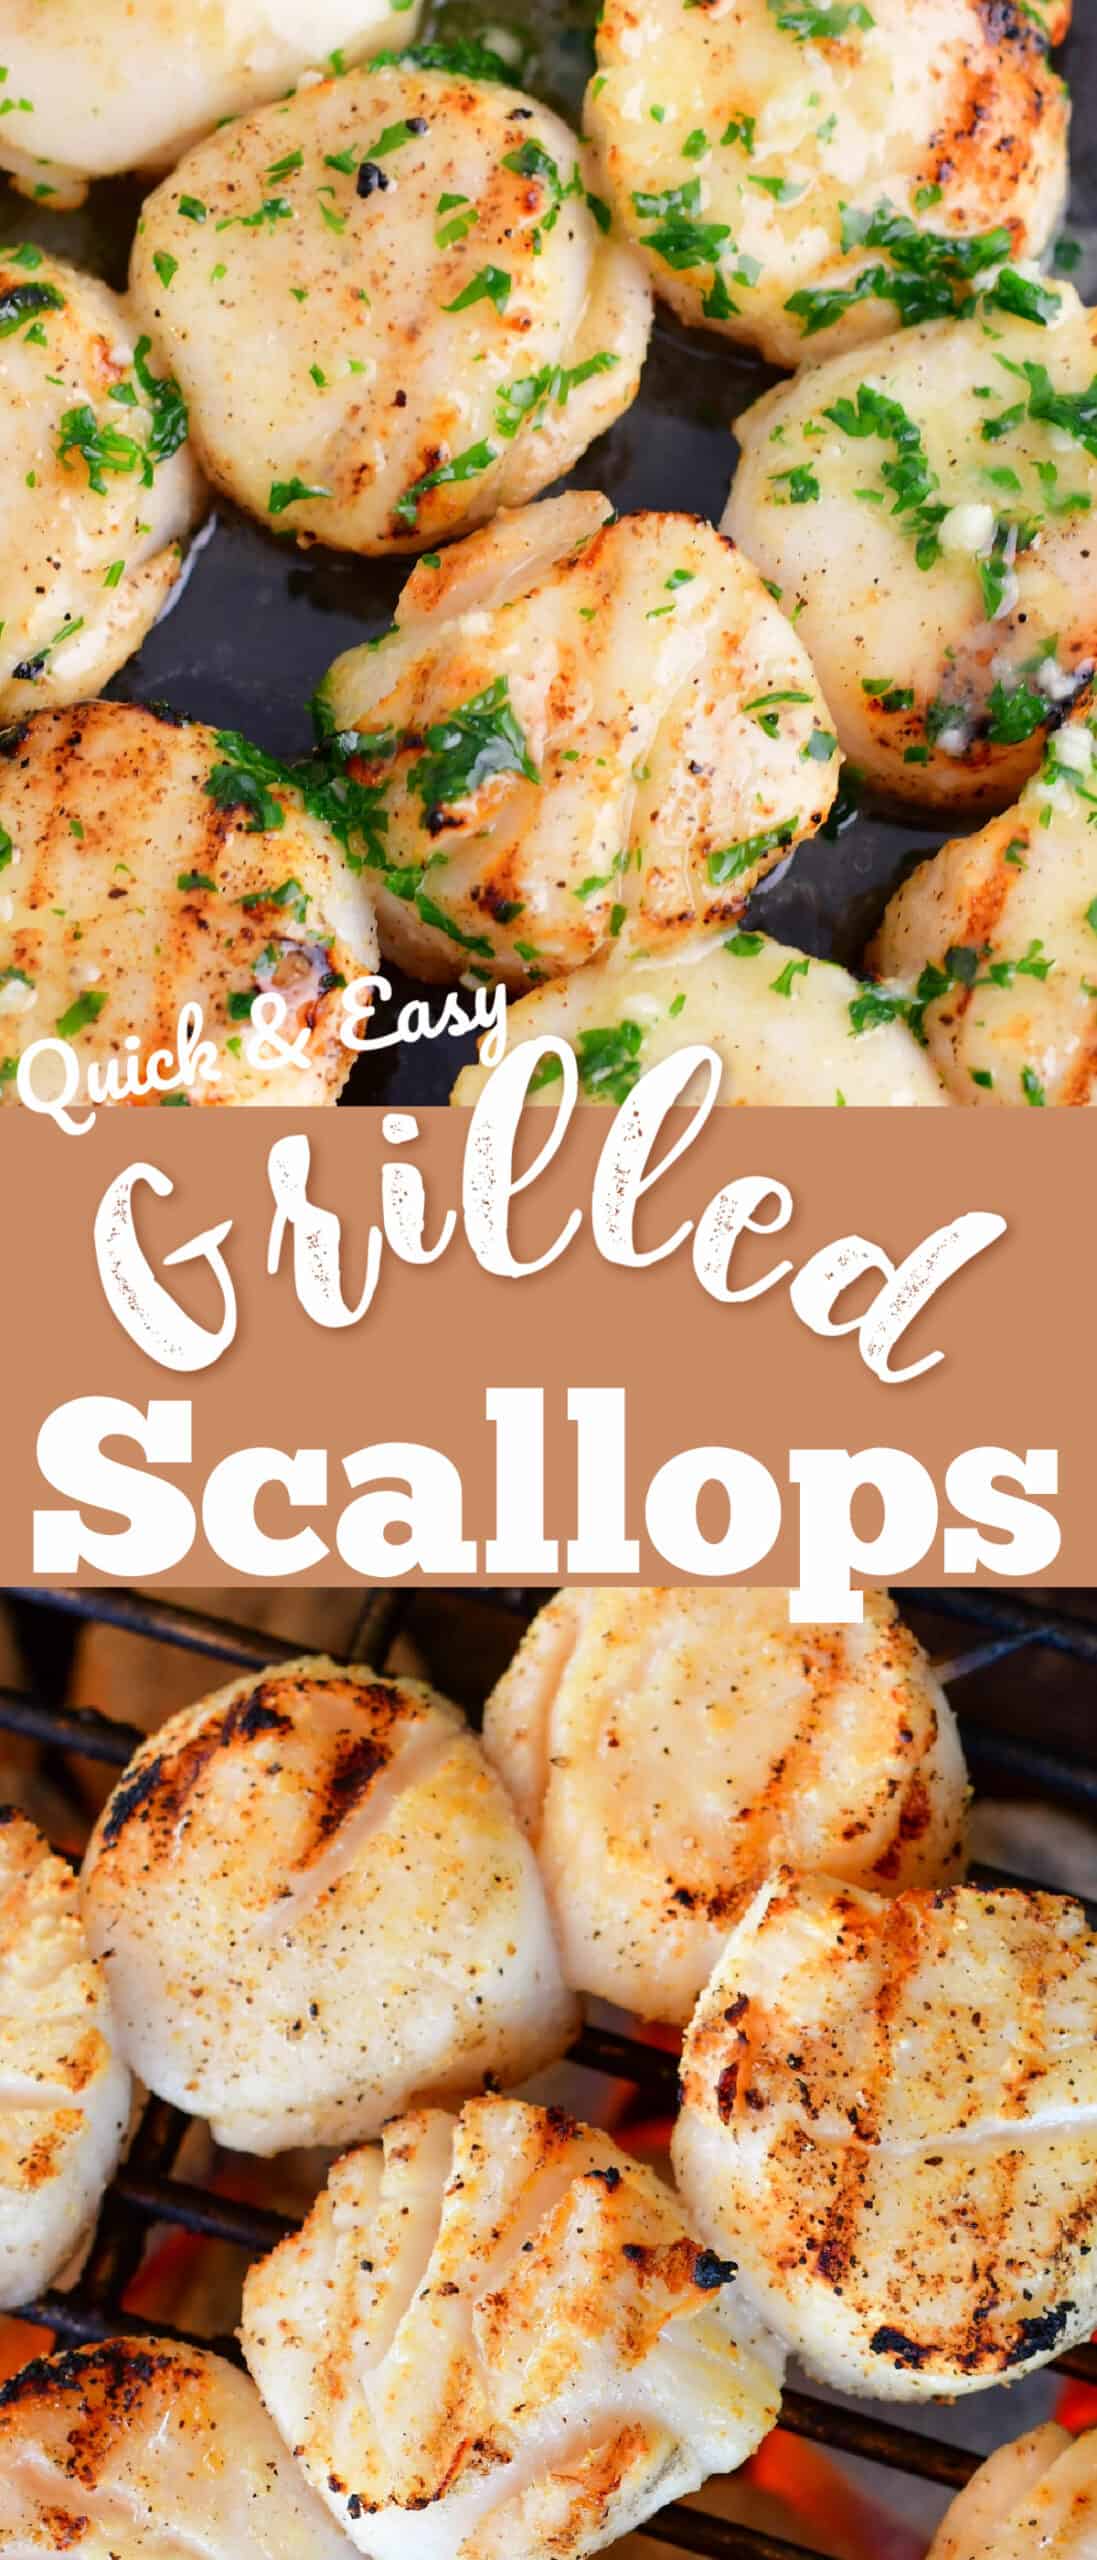 title collage of two photos of grilled scallops up close and title in the middle